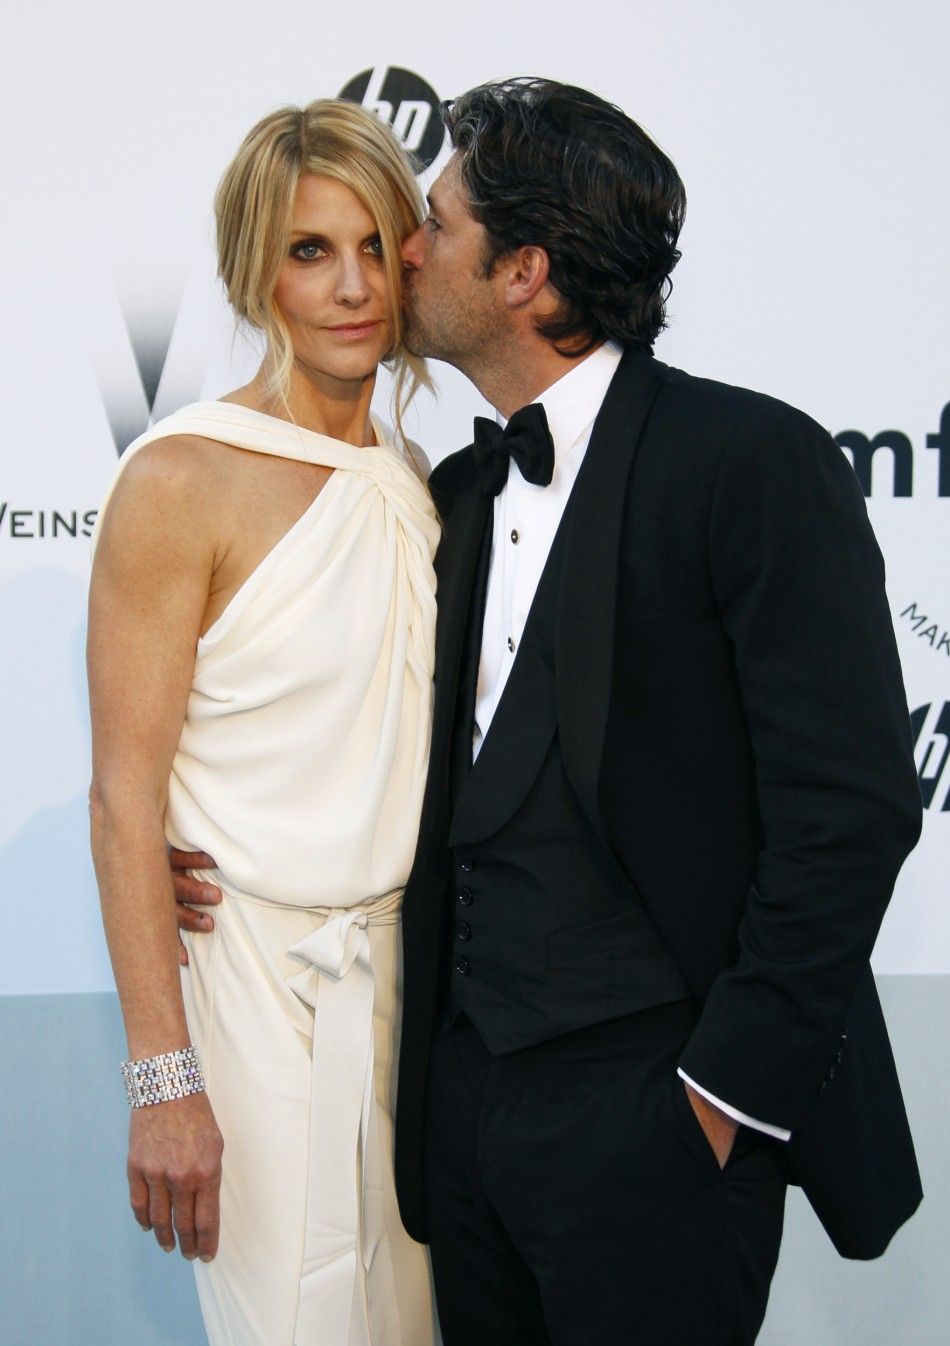 Actor Patrick Dempsey, star of the film quotEnchantedquot, poses with his wife Jillian as they arrives for amfARs Cinema Against AIDS 2011 event in Antibes during the 64th Cannes Film Festival May 19, 2011.